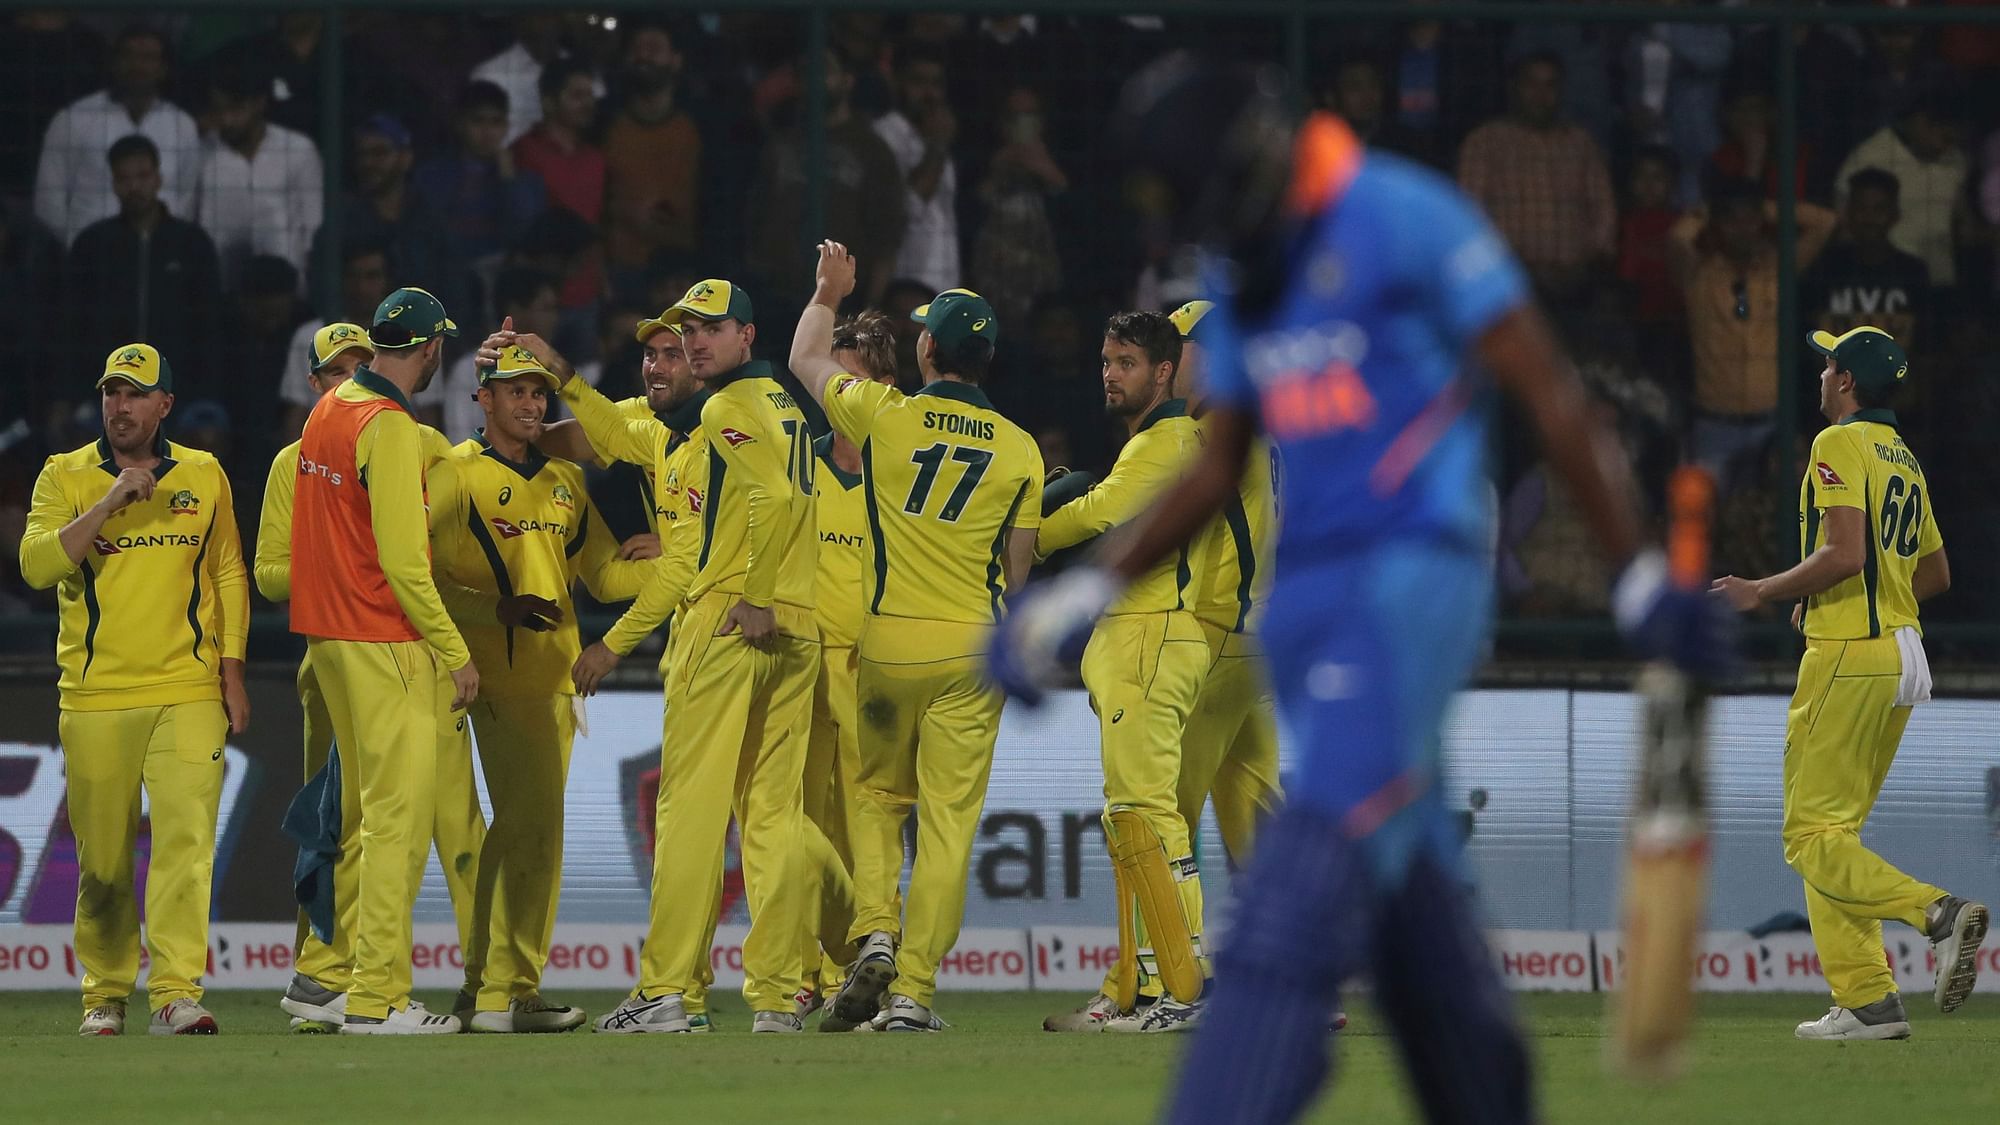 Vijay Shankar (foreground) trudges off after being dismissed during the series-deciding fifth ODI between India and Australia at New Delhi.